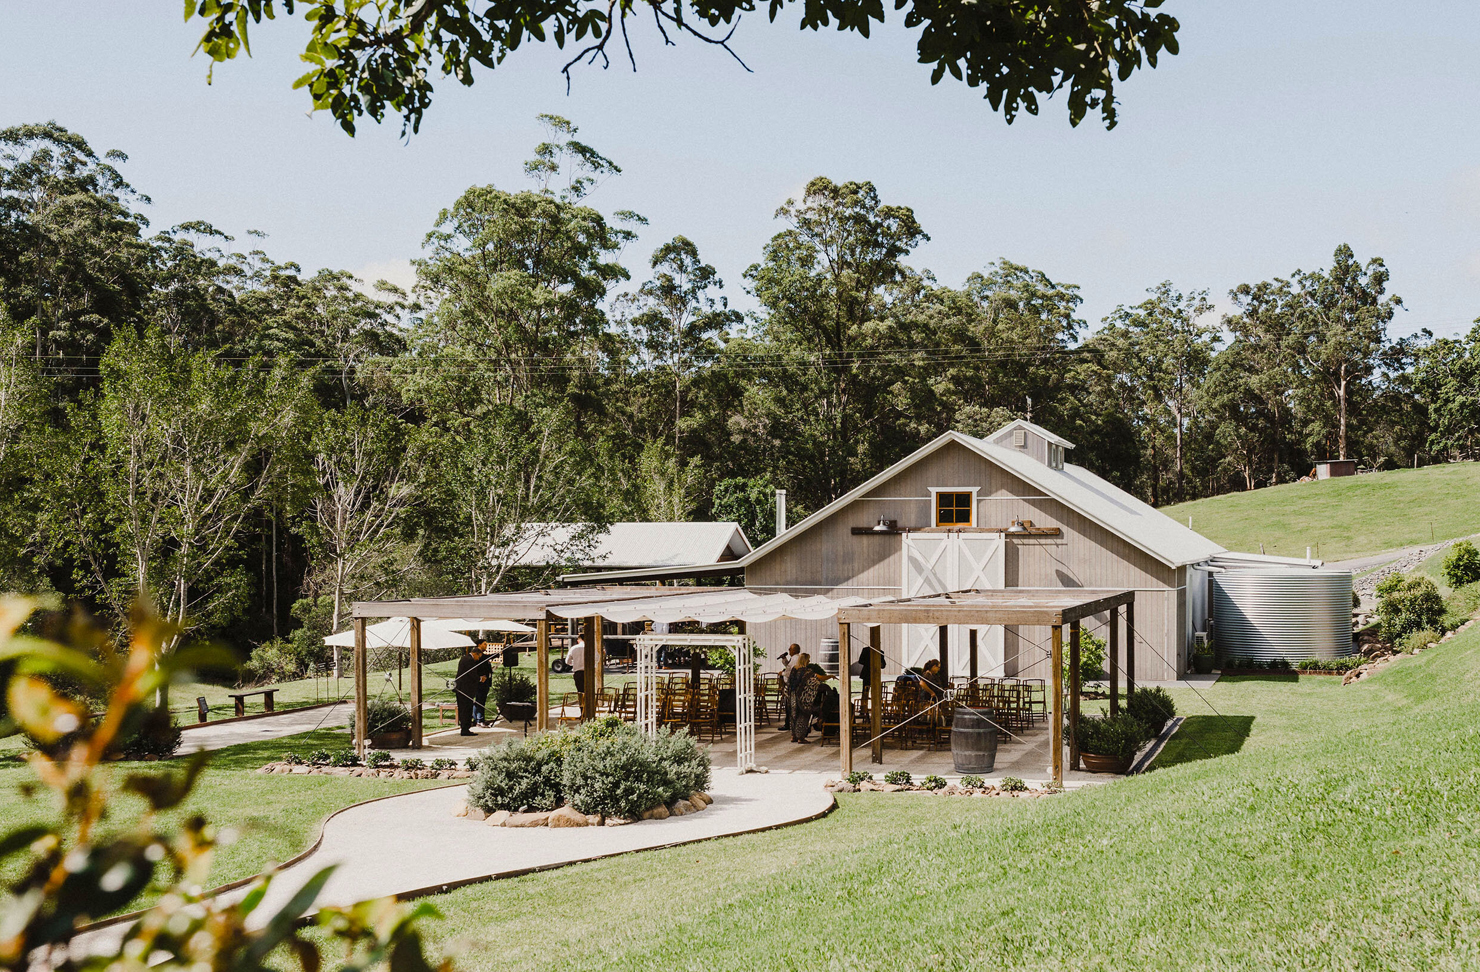 A country-style wedding venue in the foothills of Springbrook National Park.